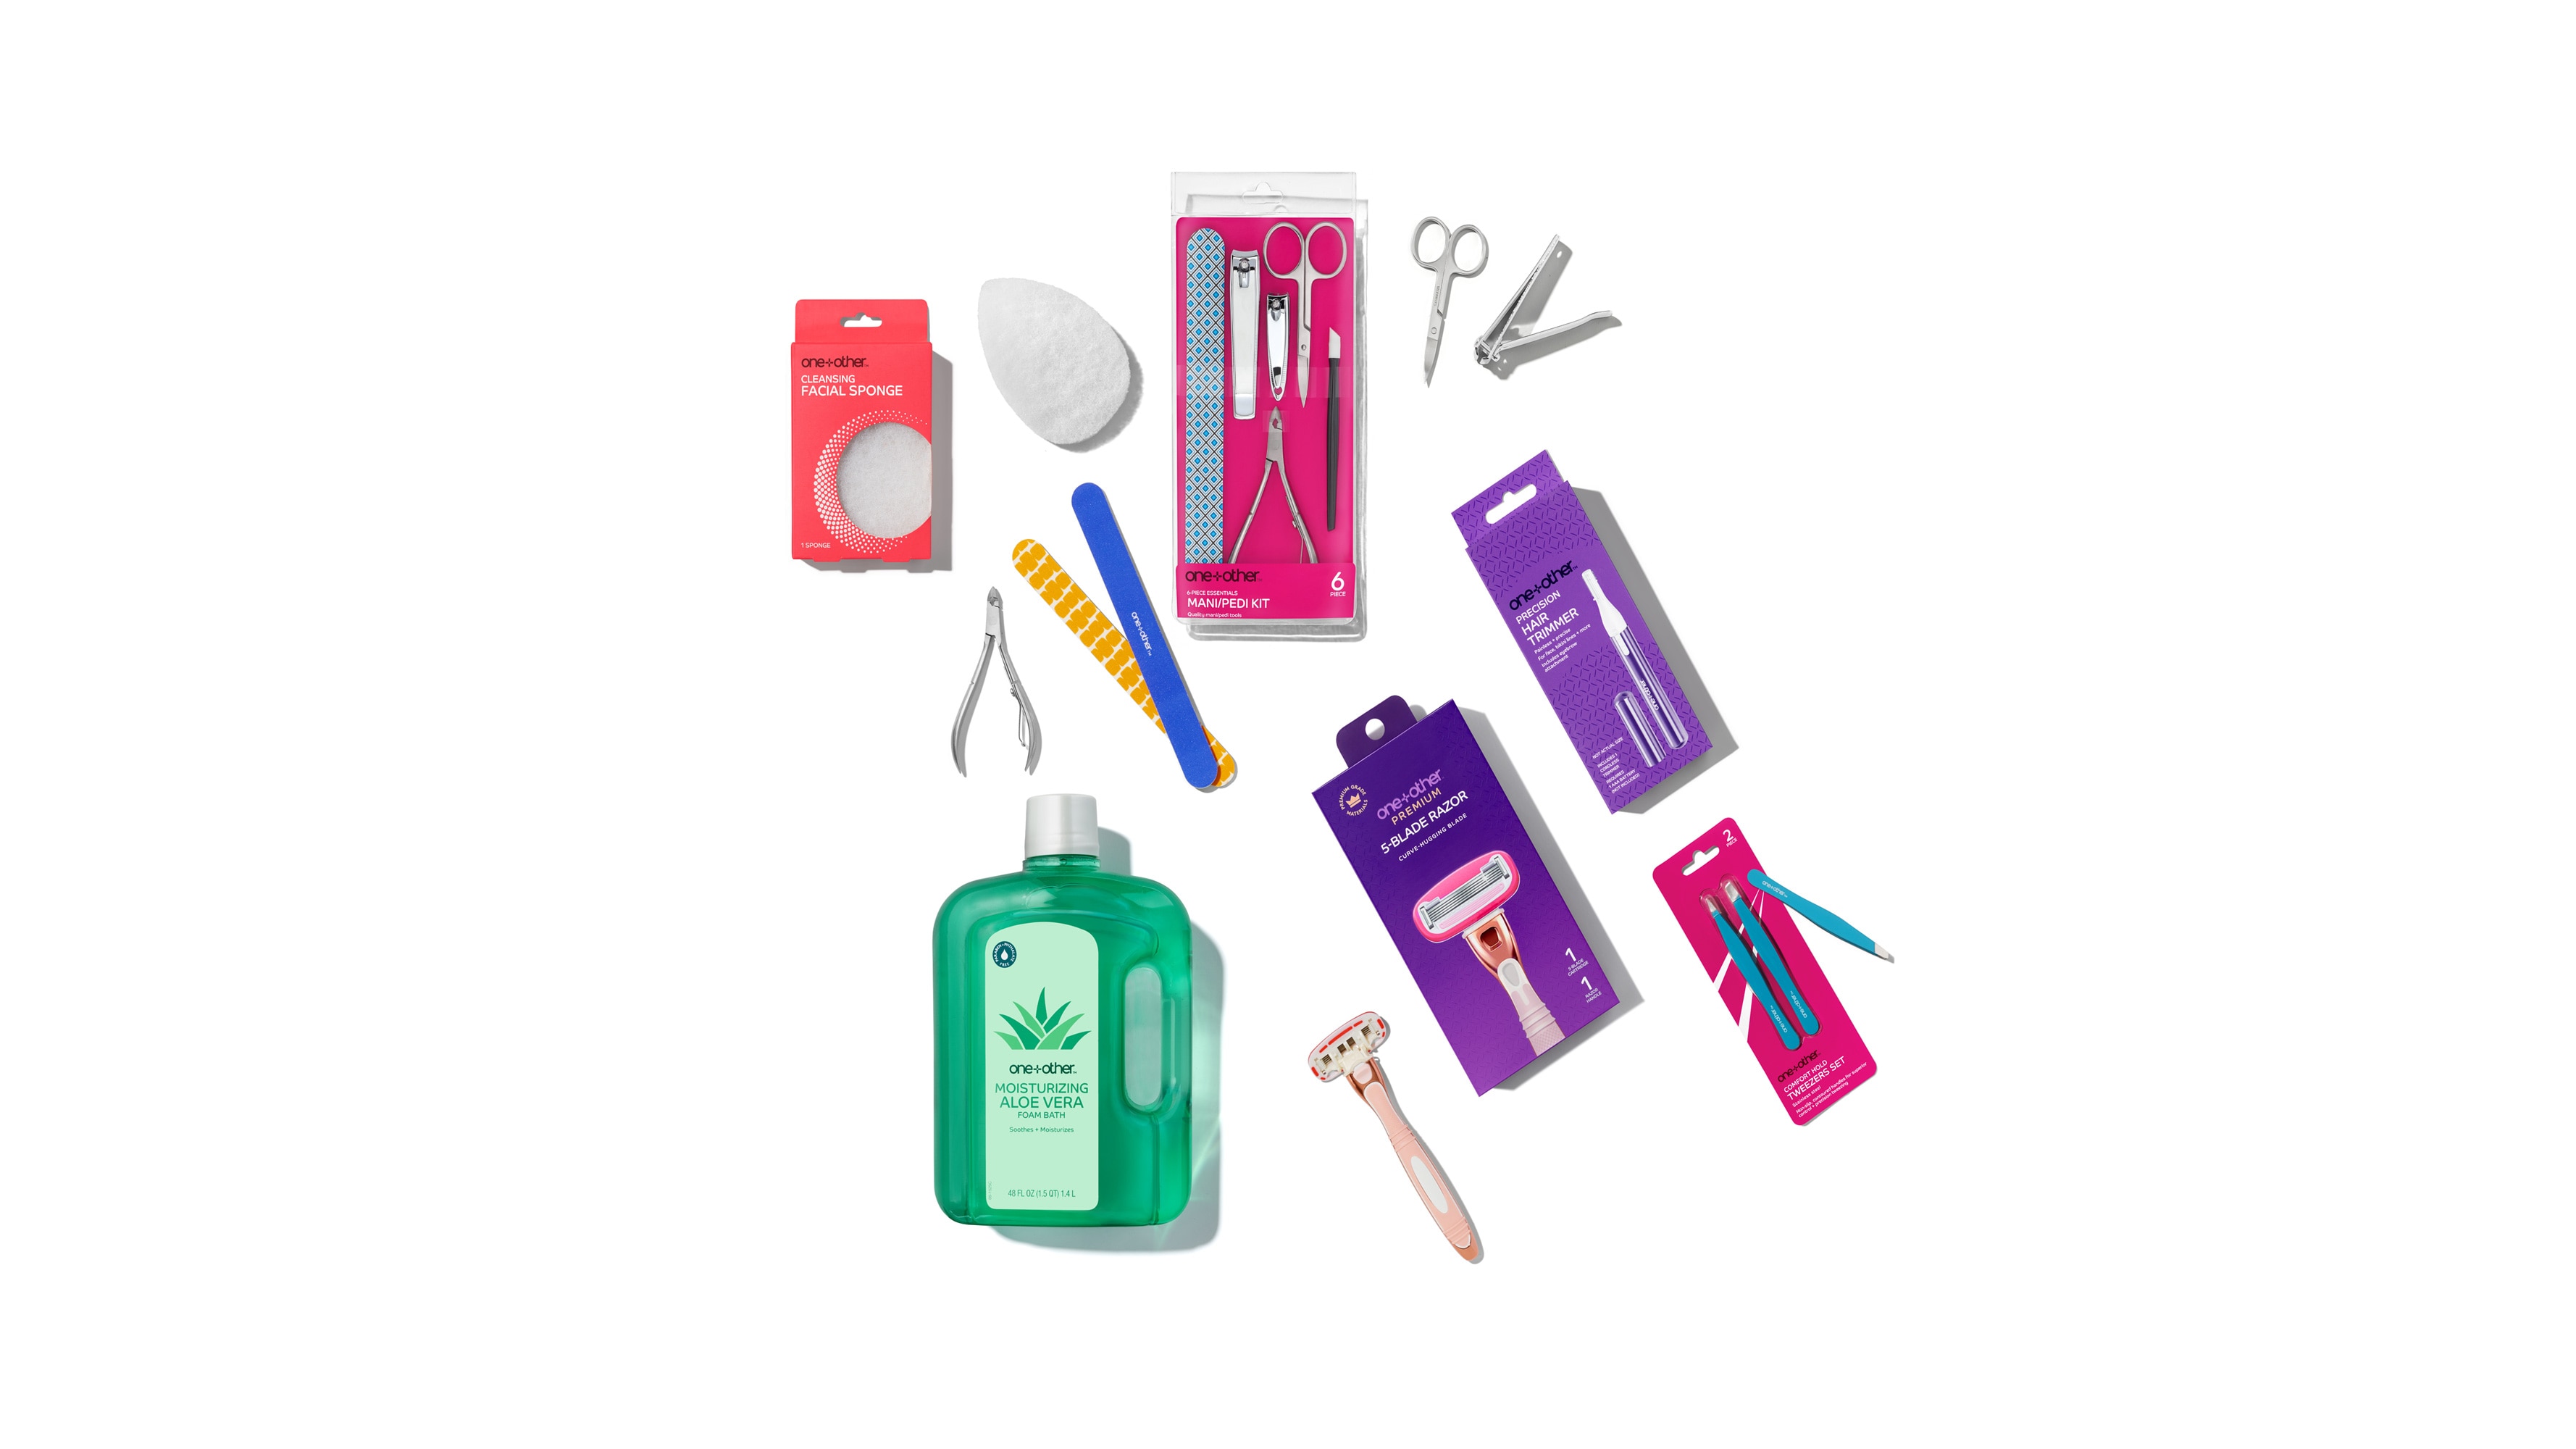 Various CVS Pharmacy personal care products from the One+Other product line